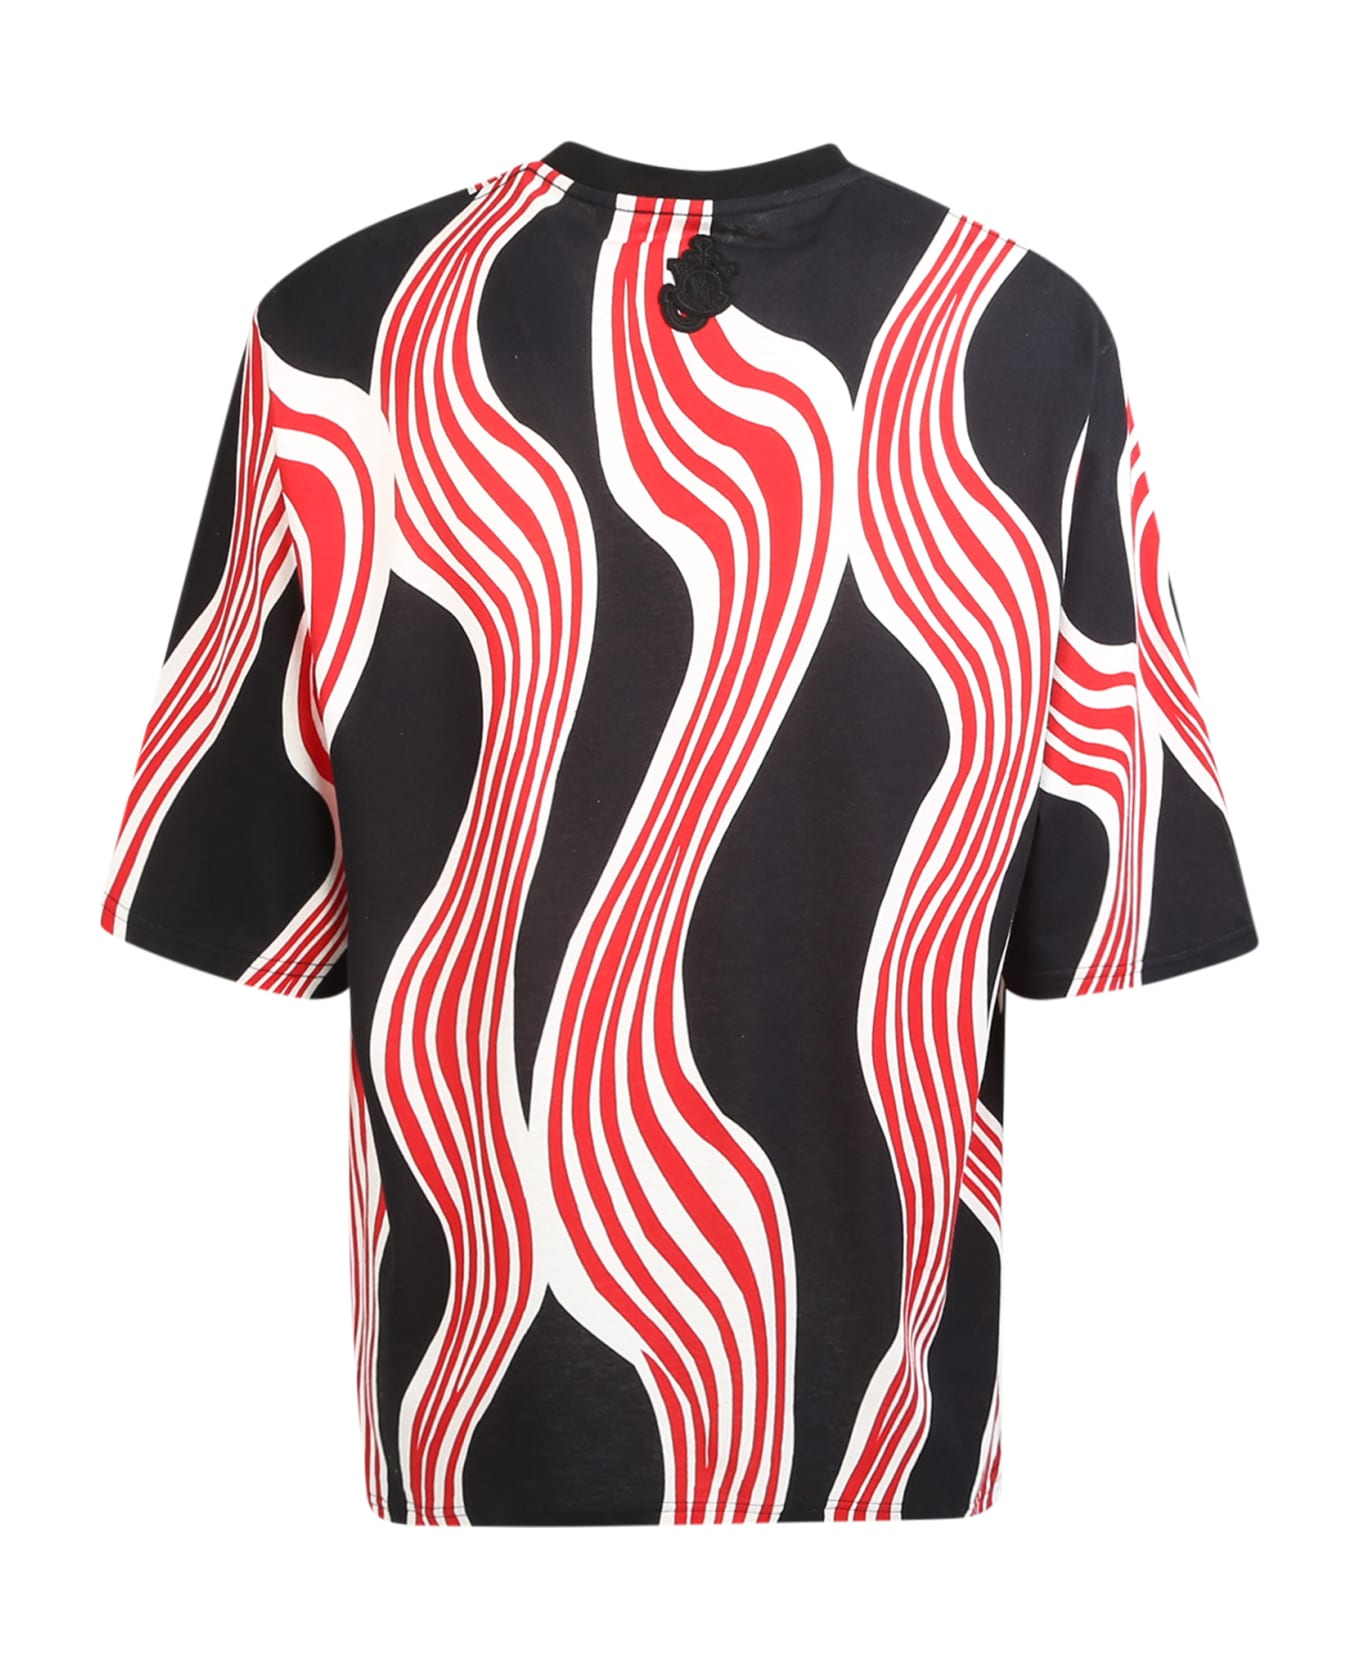 Moncler Genius Printed T-shirt - Moncler Jw Anderson - Red